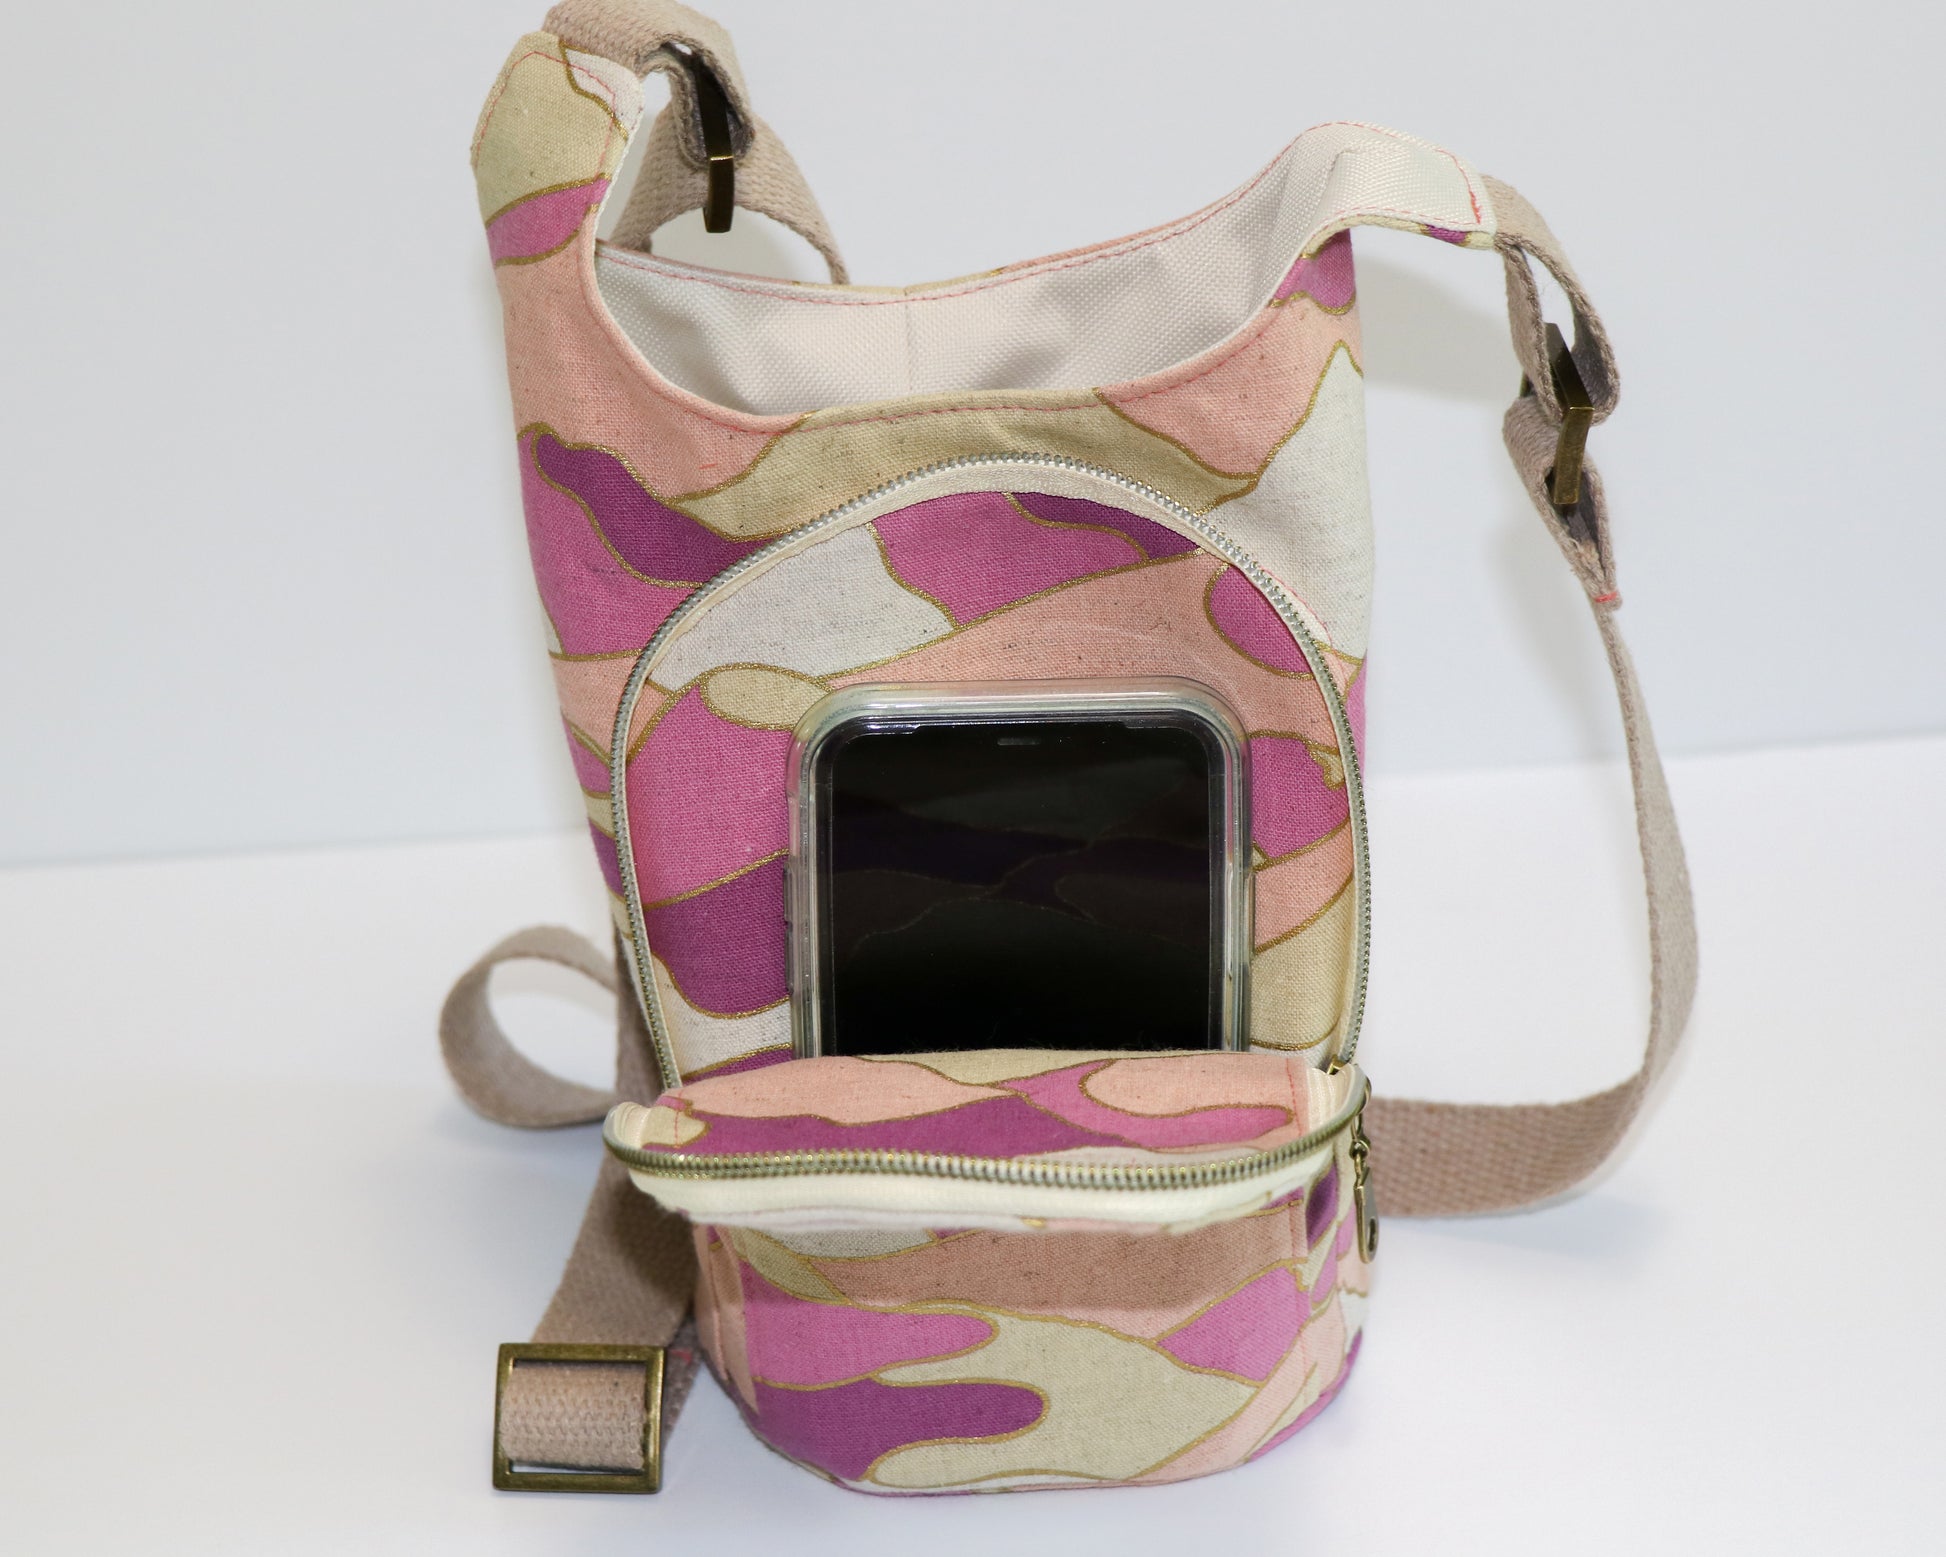 magenta and coral print water bottle sling, front view with pocket open showing phone inside